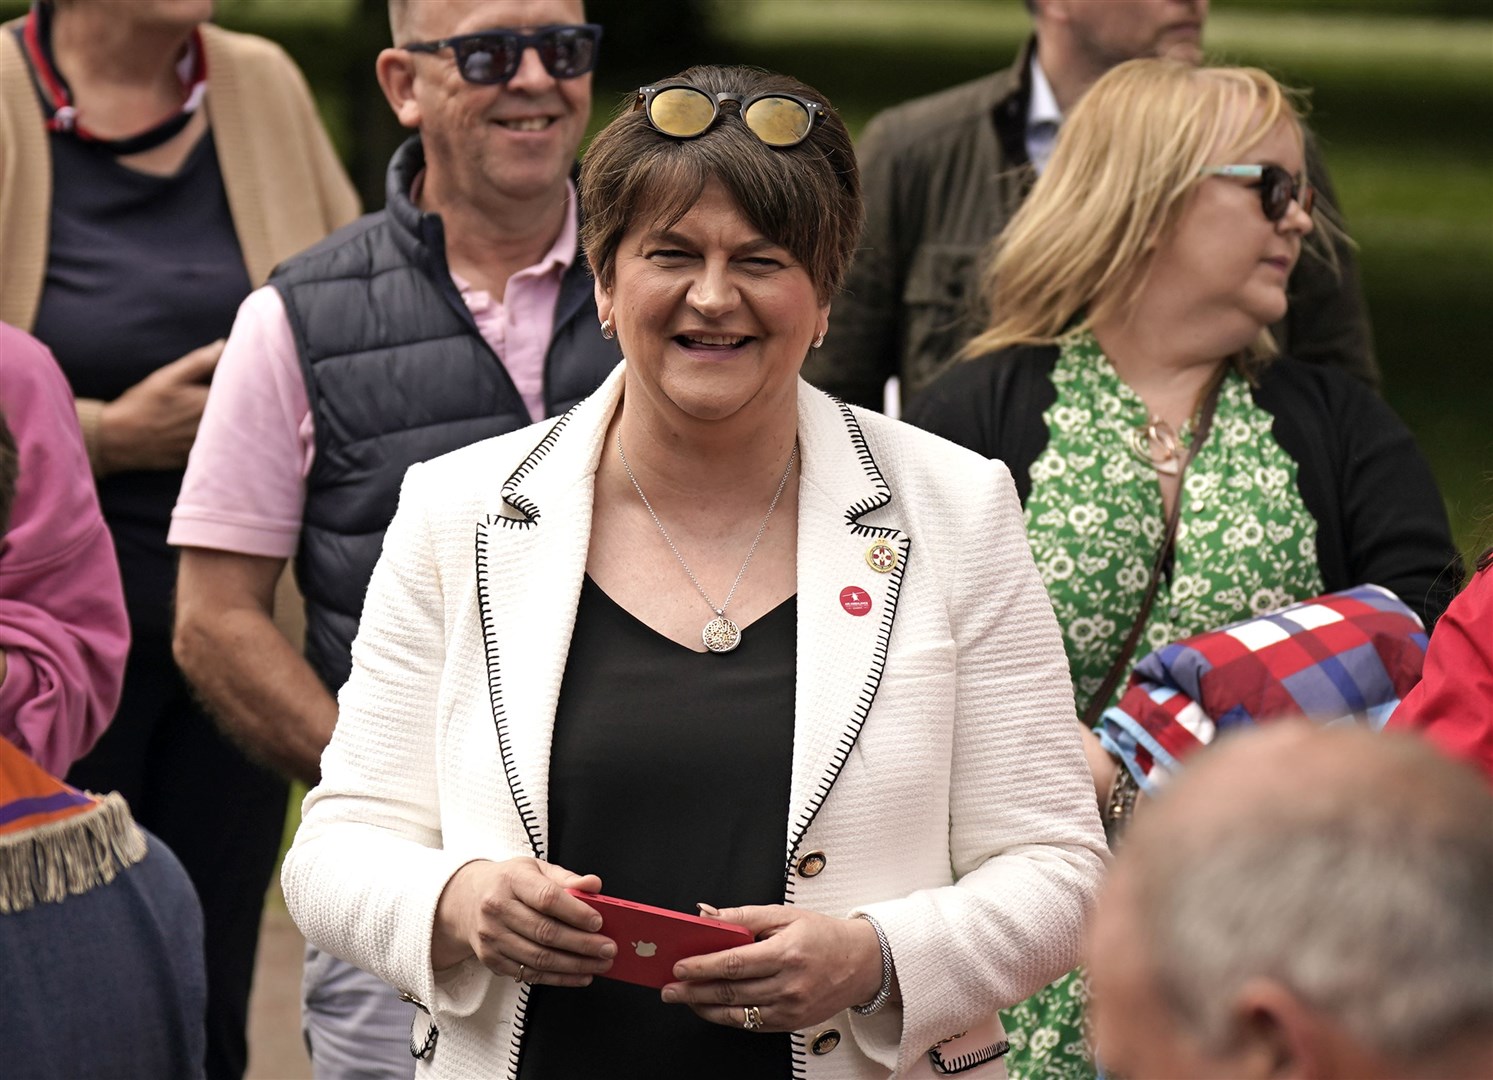 Arlene Foster has been recognised in the list (Niall Carson/PA)